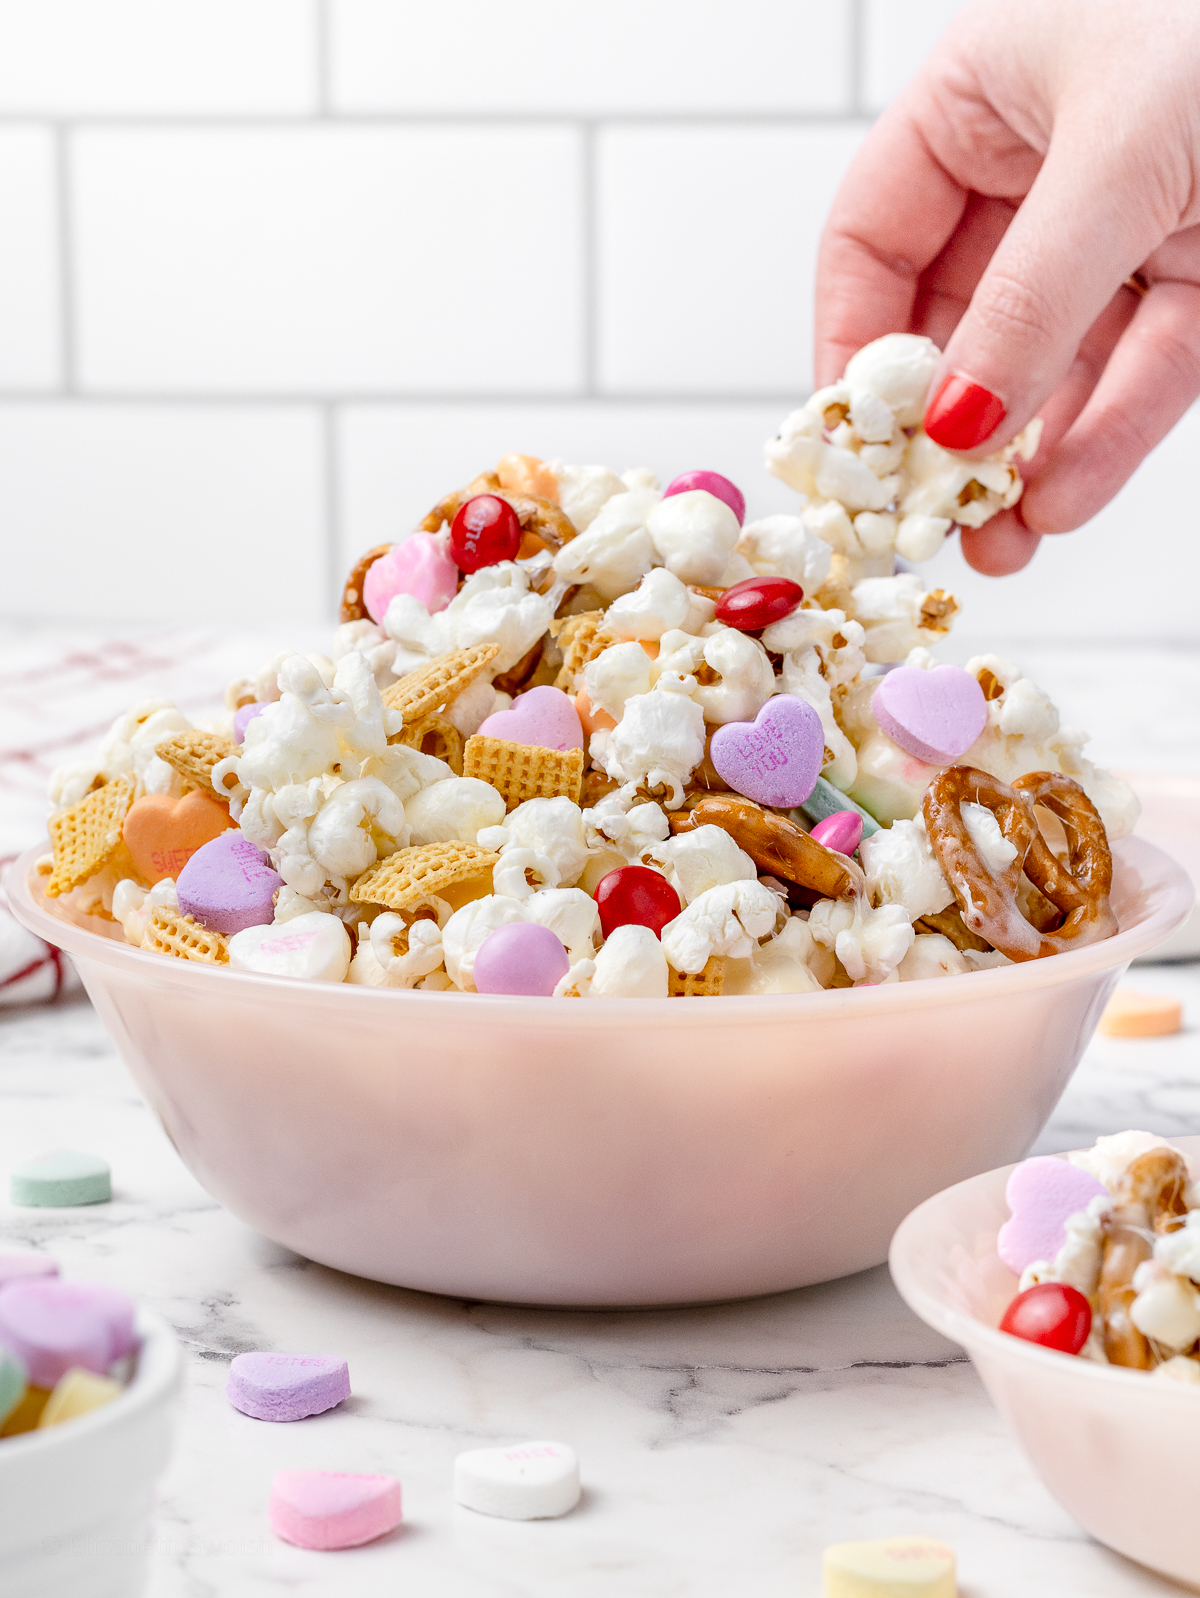 Hand grabbing the marshmallow coated popcorn snack mix out of a pink bowl